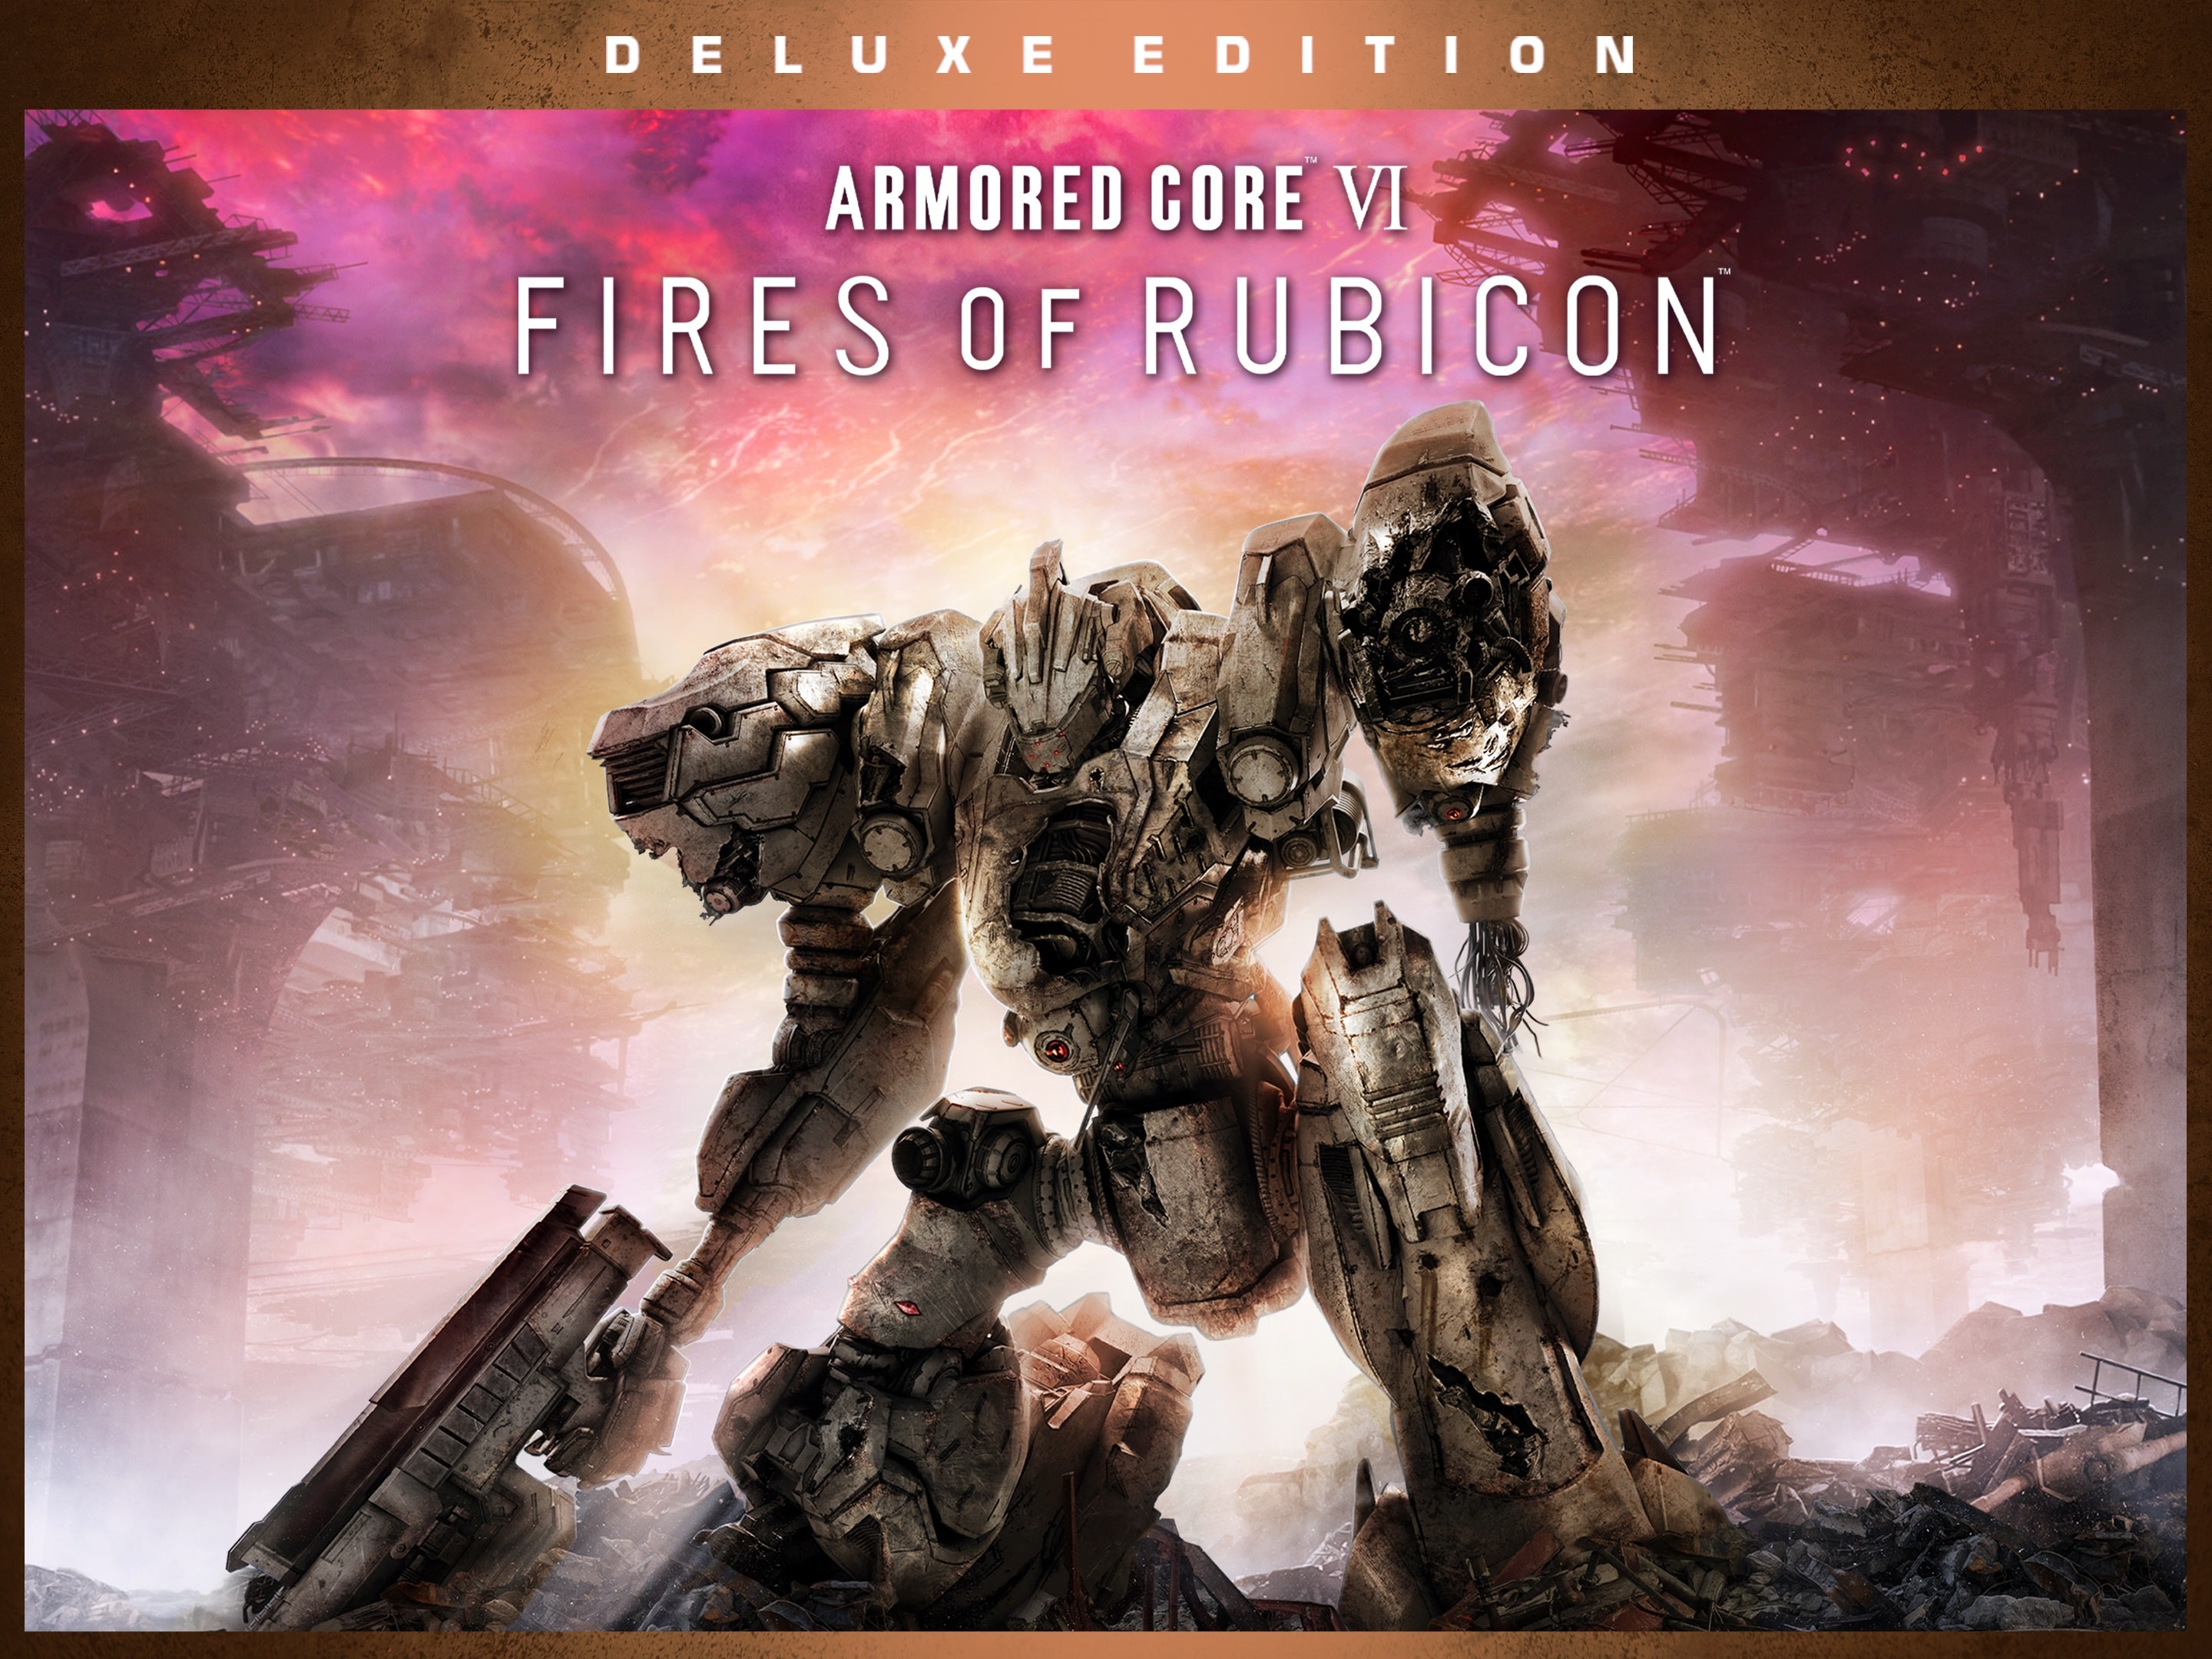 Armored Core VI Fires of Rubicon - Gameplay Trailer